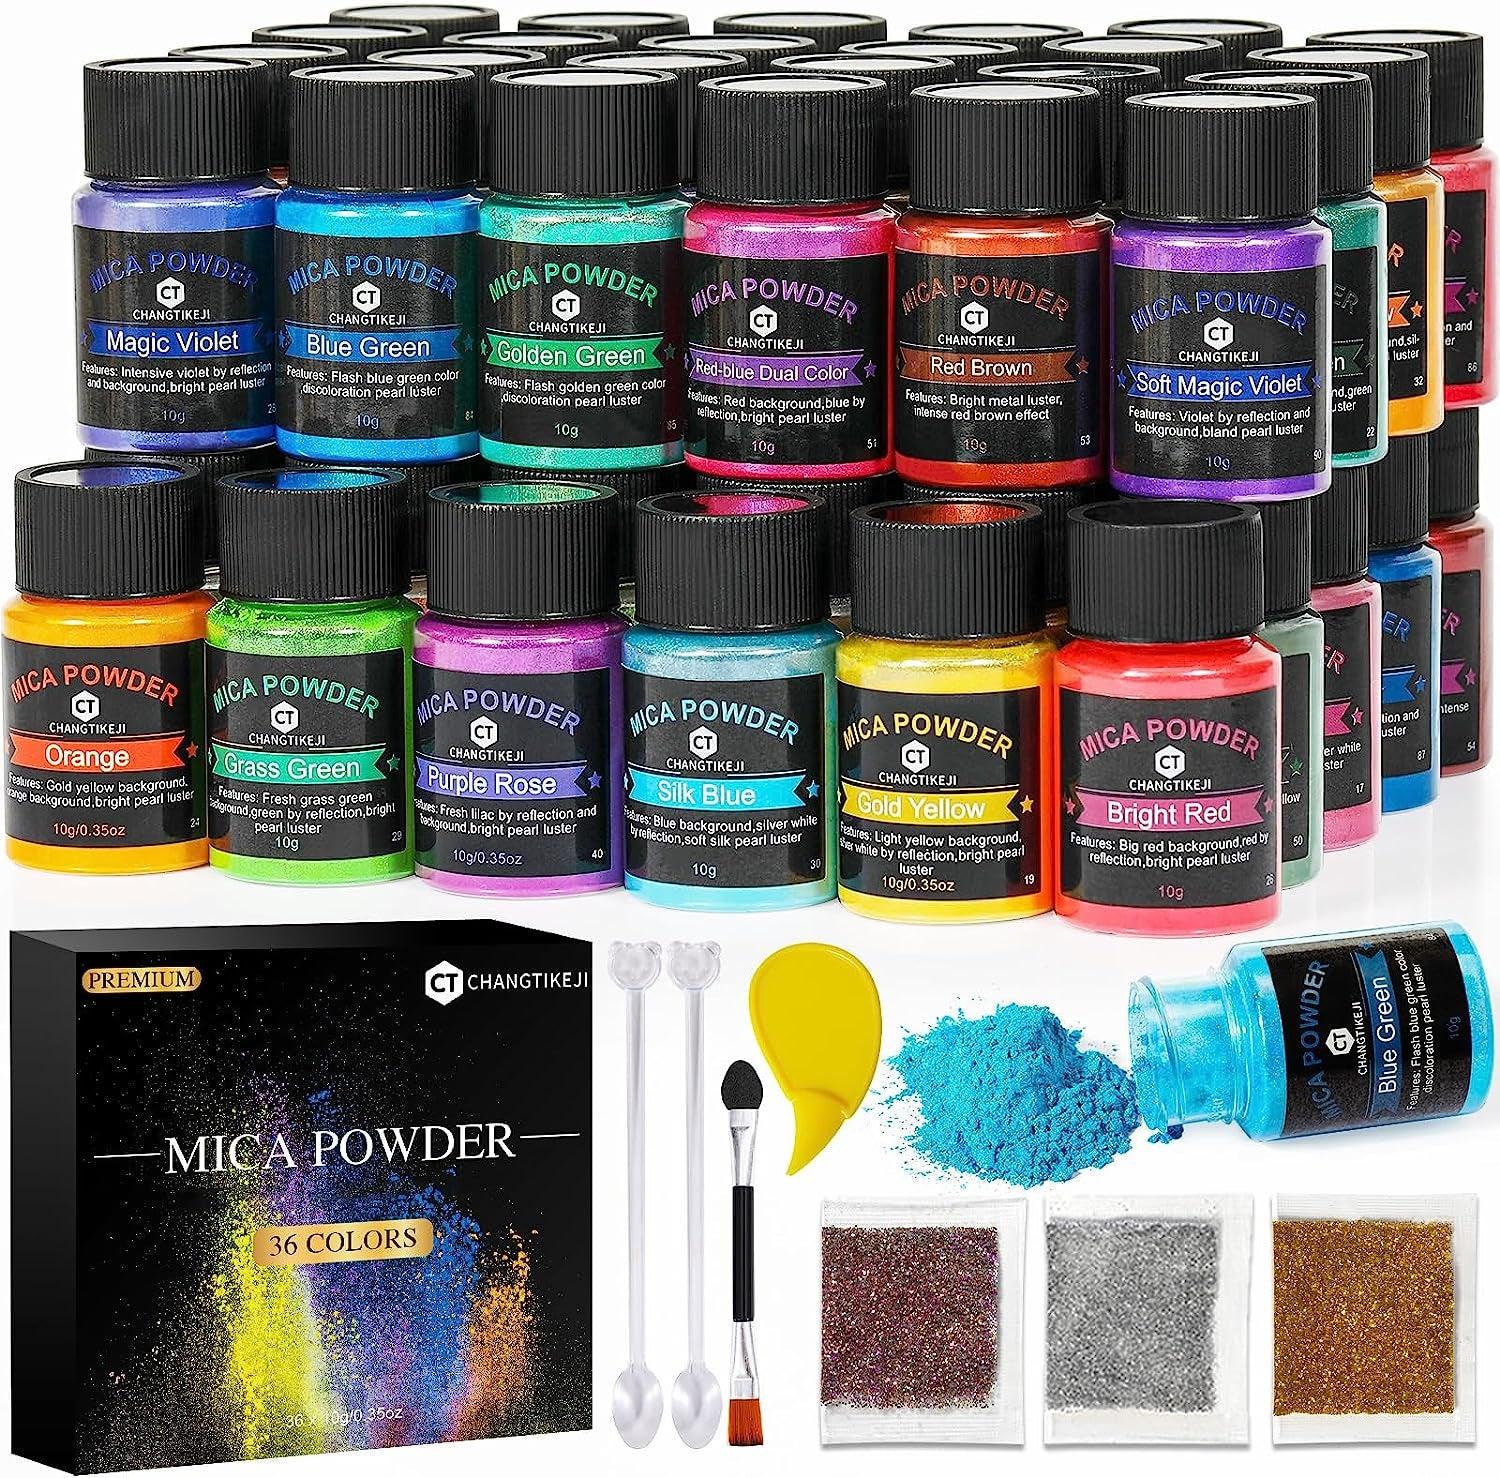 Mica Powder for Epoxy Resin -12 24 30 Colors Pigment Powder Resin Dye,  Natural Cosmetic Grade Glitter Colorant Pearlescent Powder for Paint, Soap  Making, Nail Polish, Candle Making, Bath Bombs, Slime, 5g